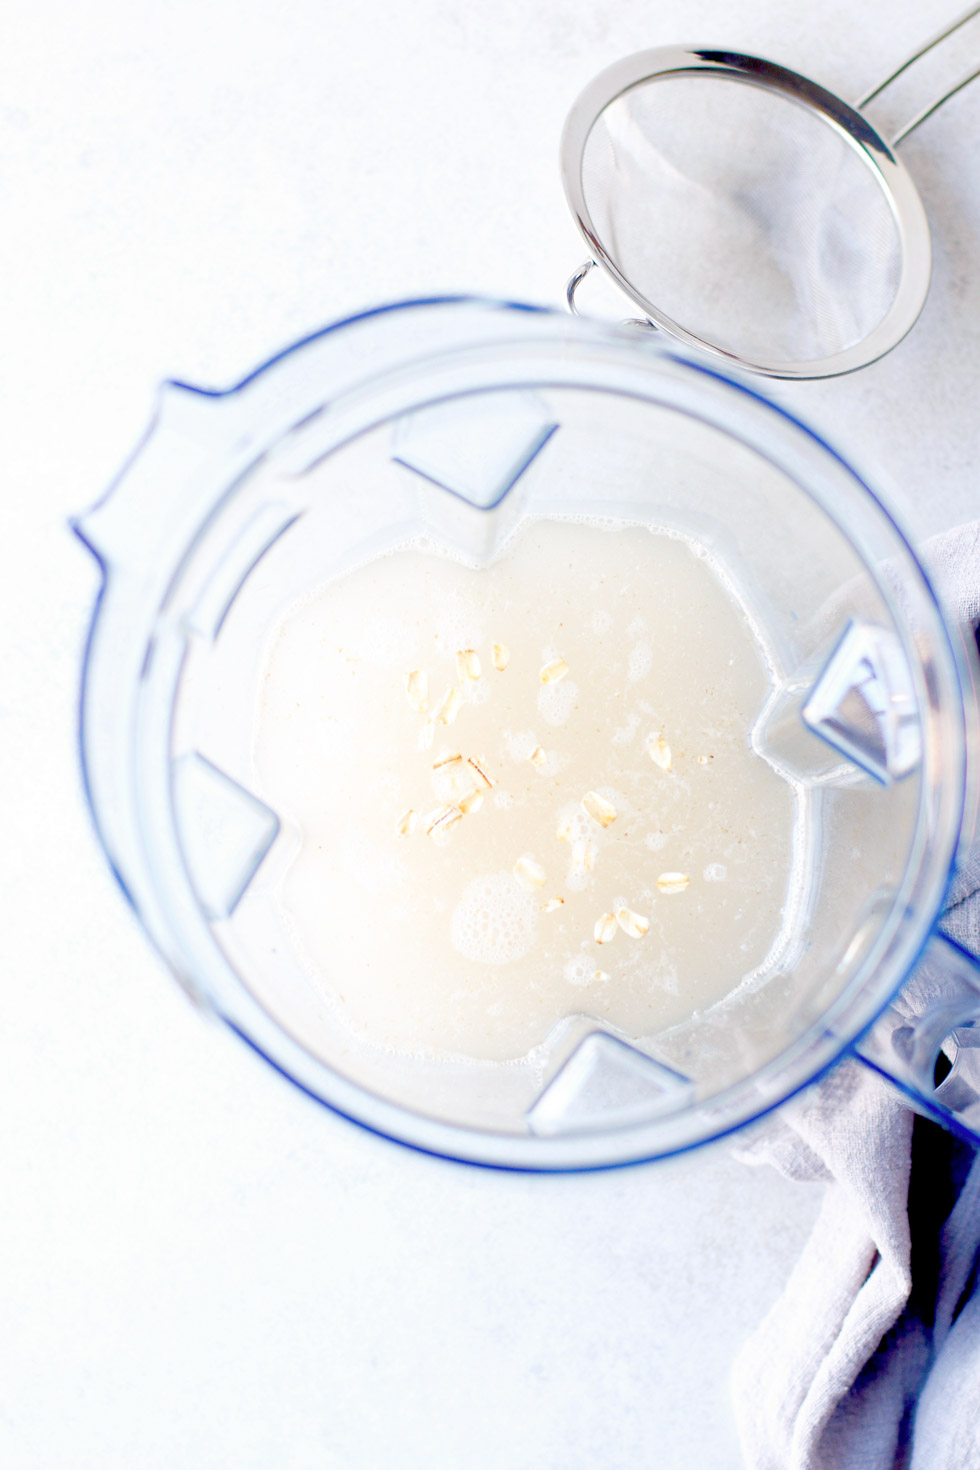 How to Make Oat Milk Blending Oats and Water